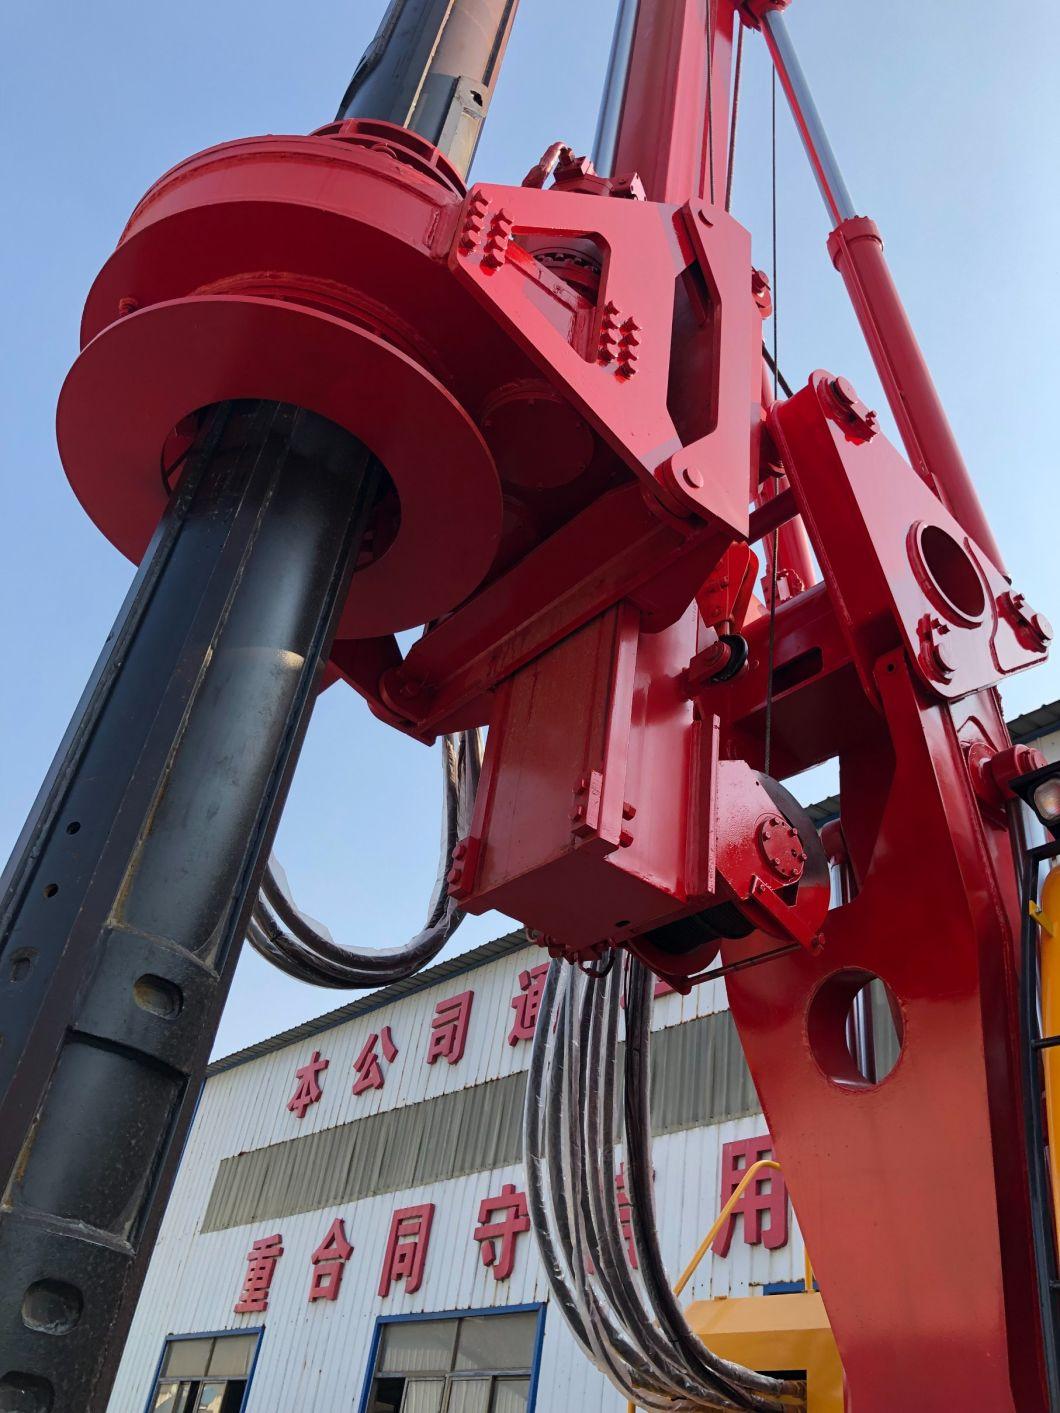 Hydraulic Rotary Bore Piling Rig Engineer Machine for Construction Foundation